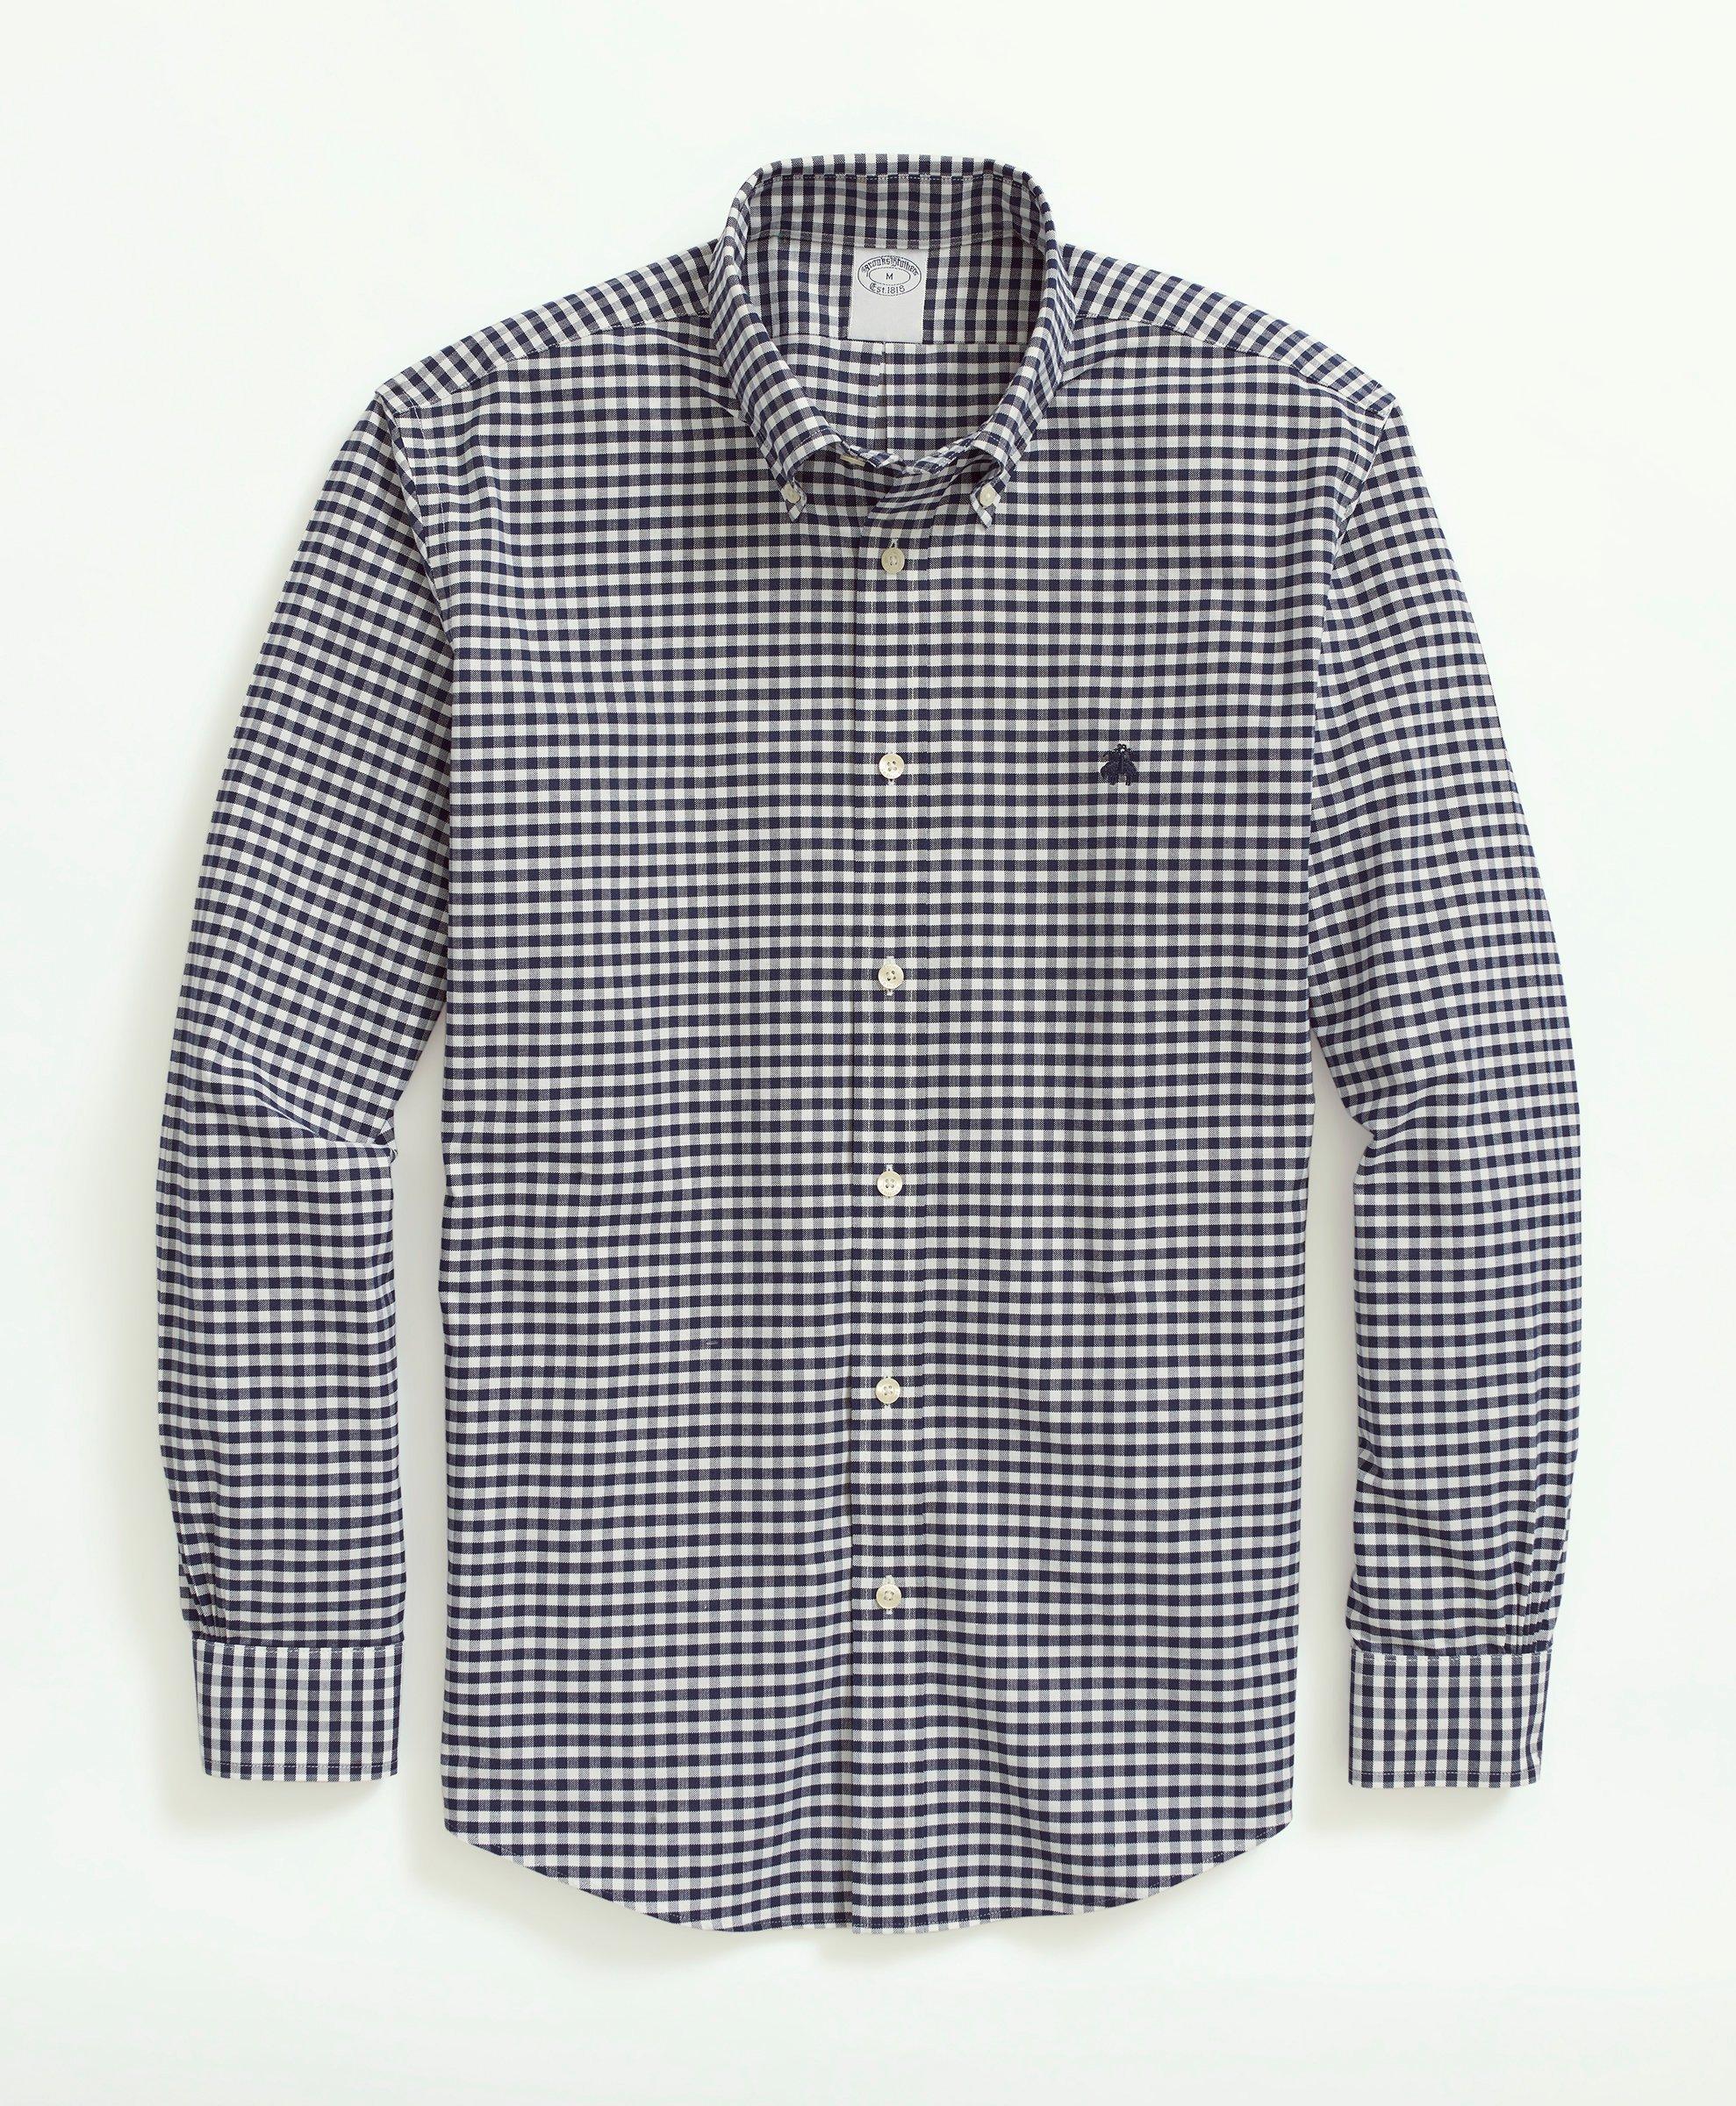 Brooks Brothers Stretch Non-iron Oxford Button-down Collar, Gingham Sport Shirt | Navy | Size Xs